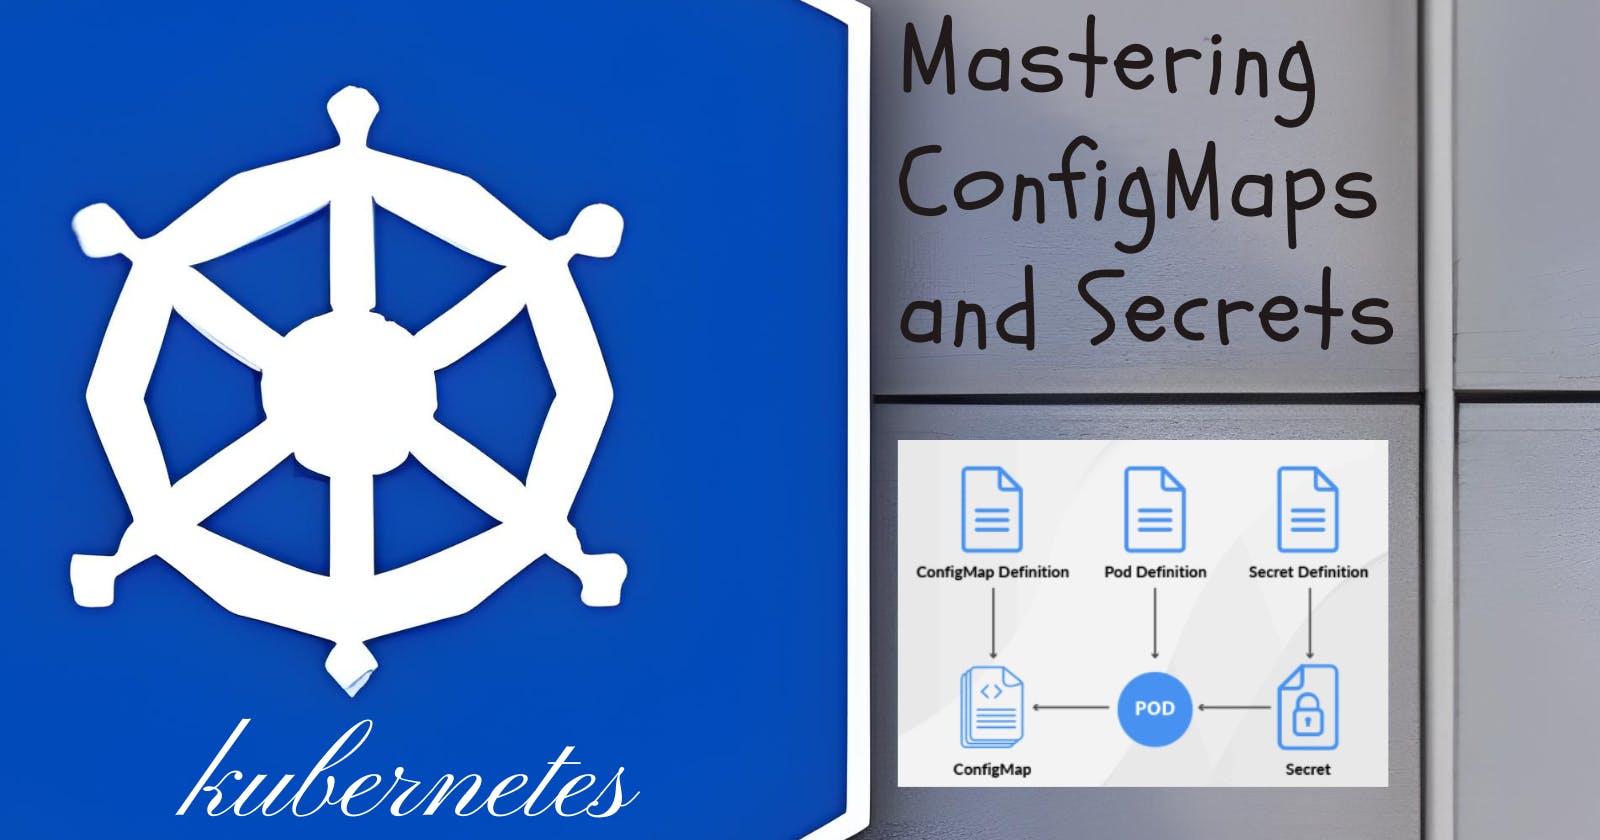 Mastering ConfigMaps and Secrets in Kubernetes